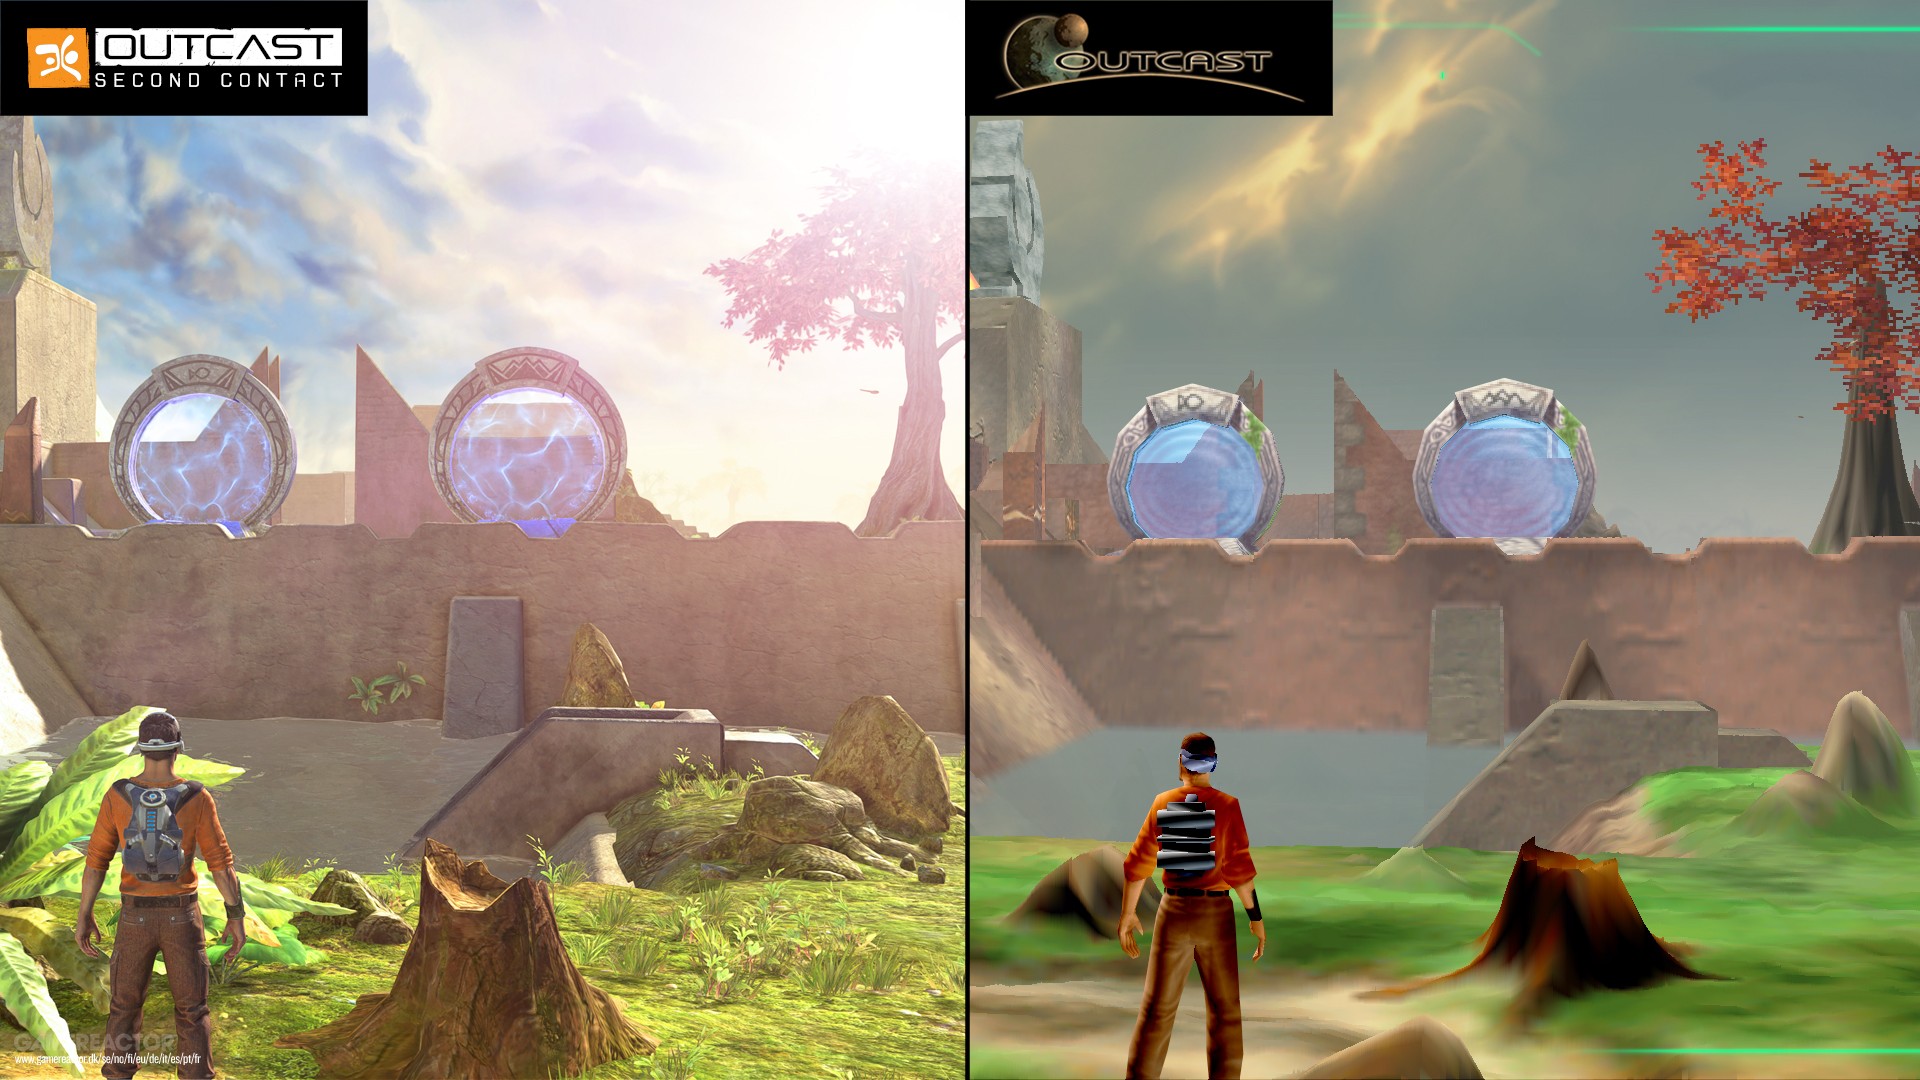 Outcast a new beginning pc. Игра Outcast second contact. Outcast 1999. Outcast Remastered. Outcast second contact 1999.